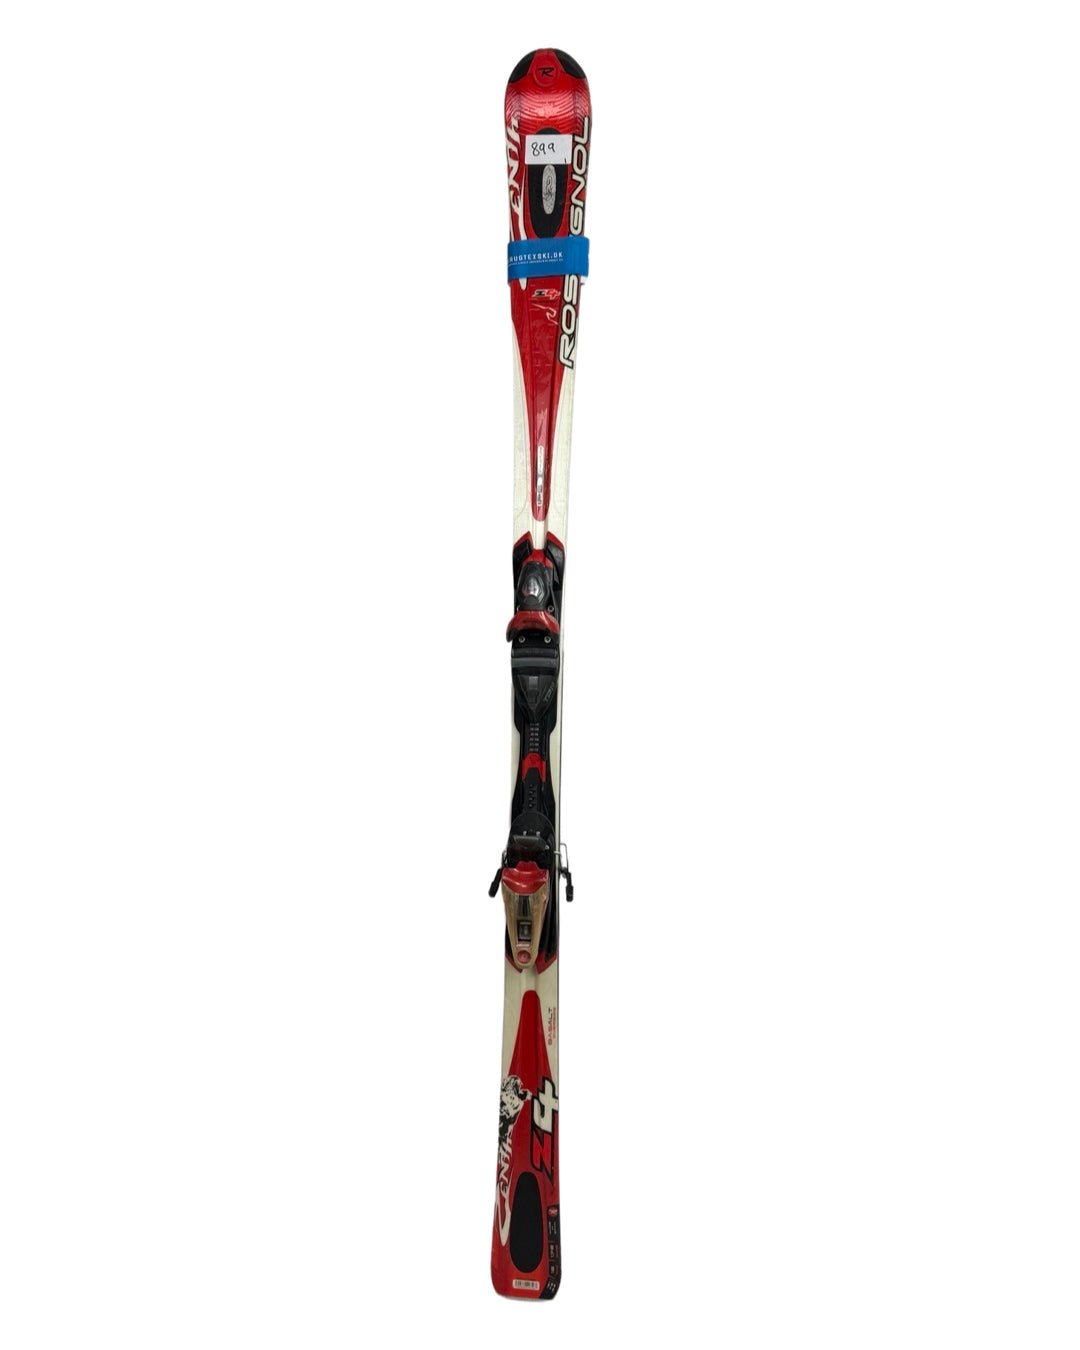 Adult skis - mixed 899